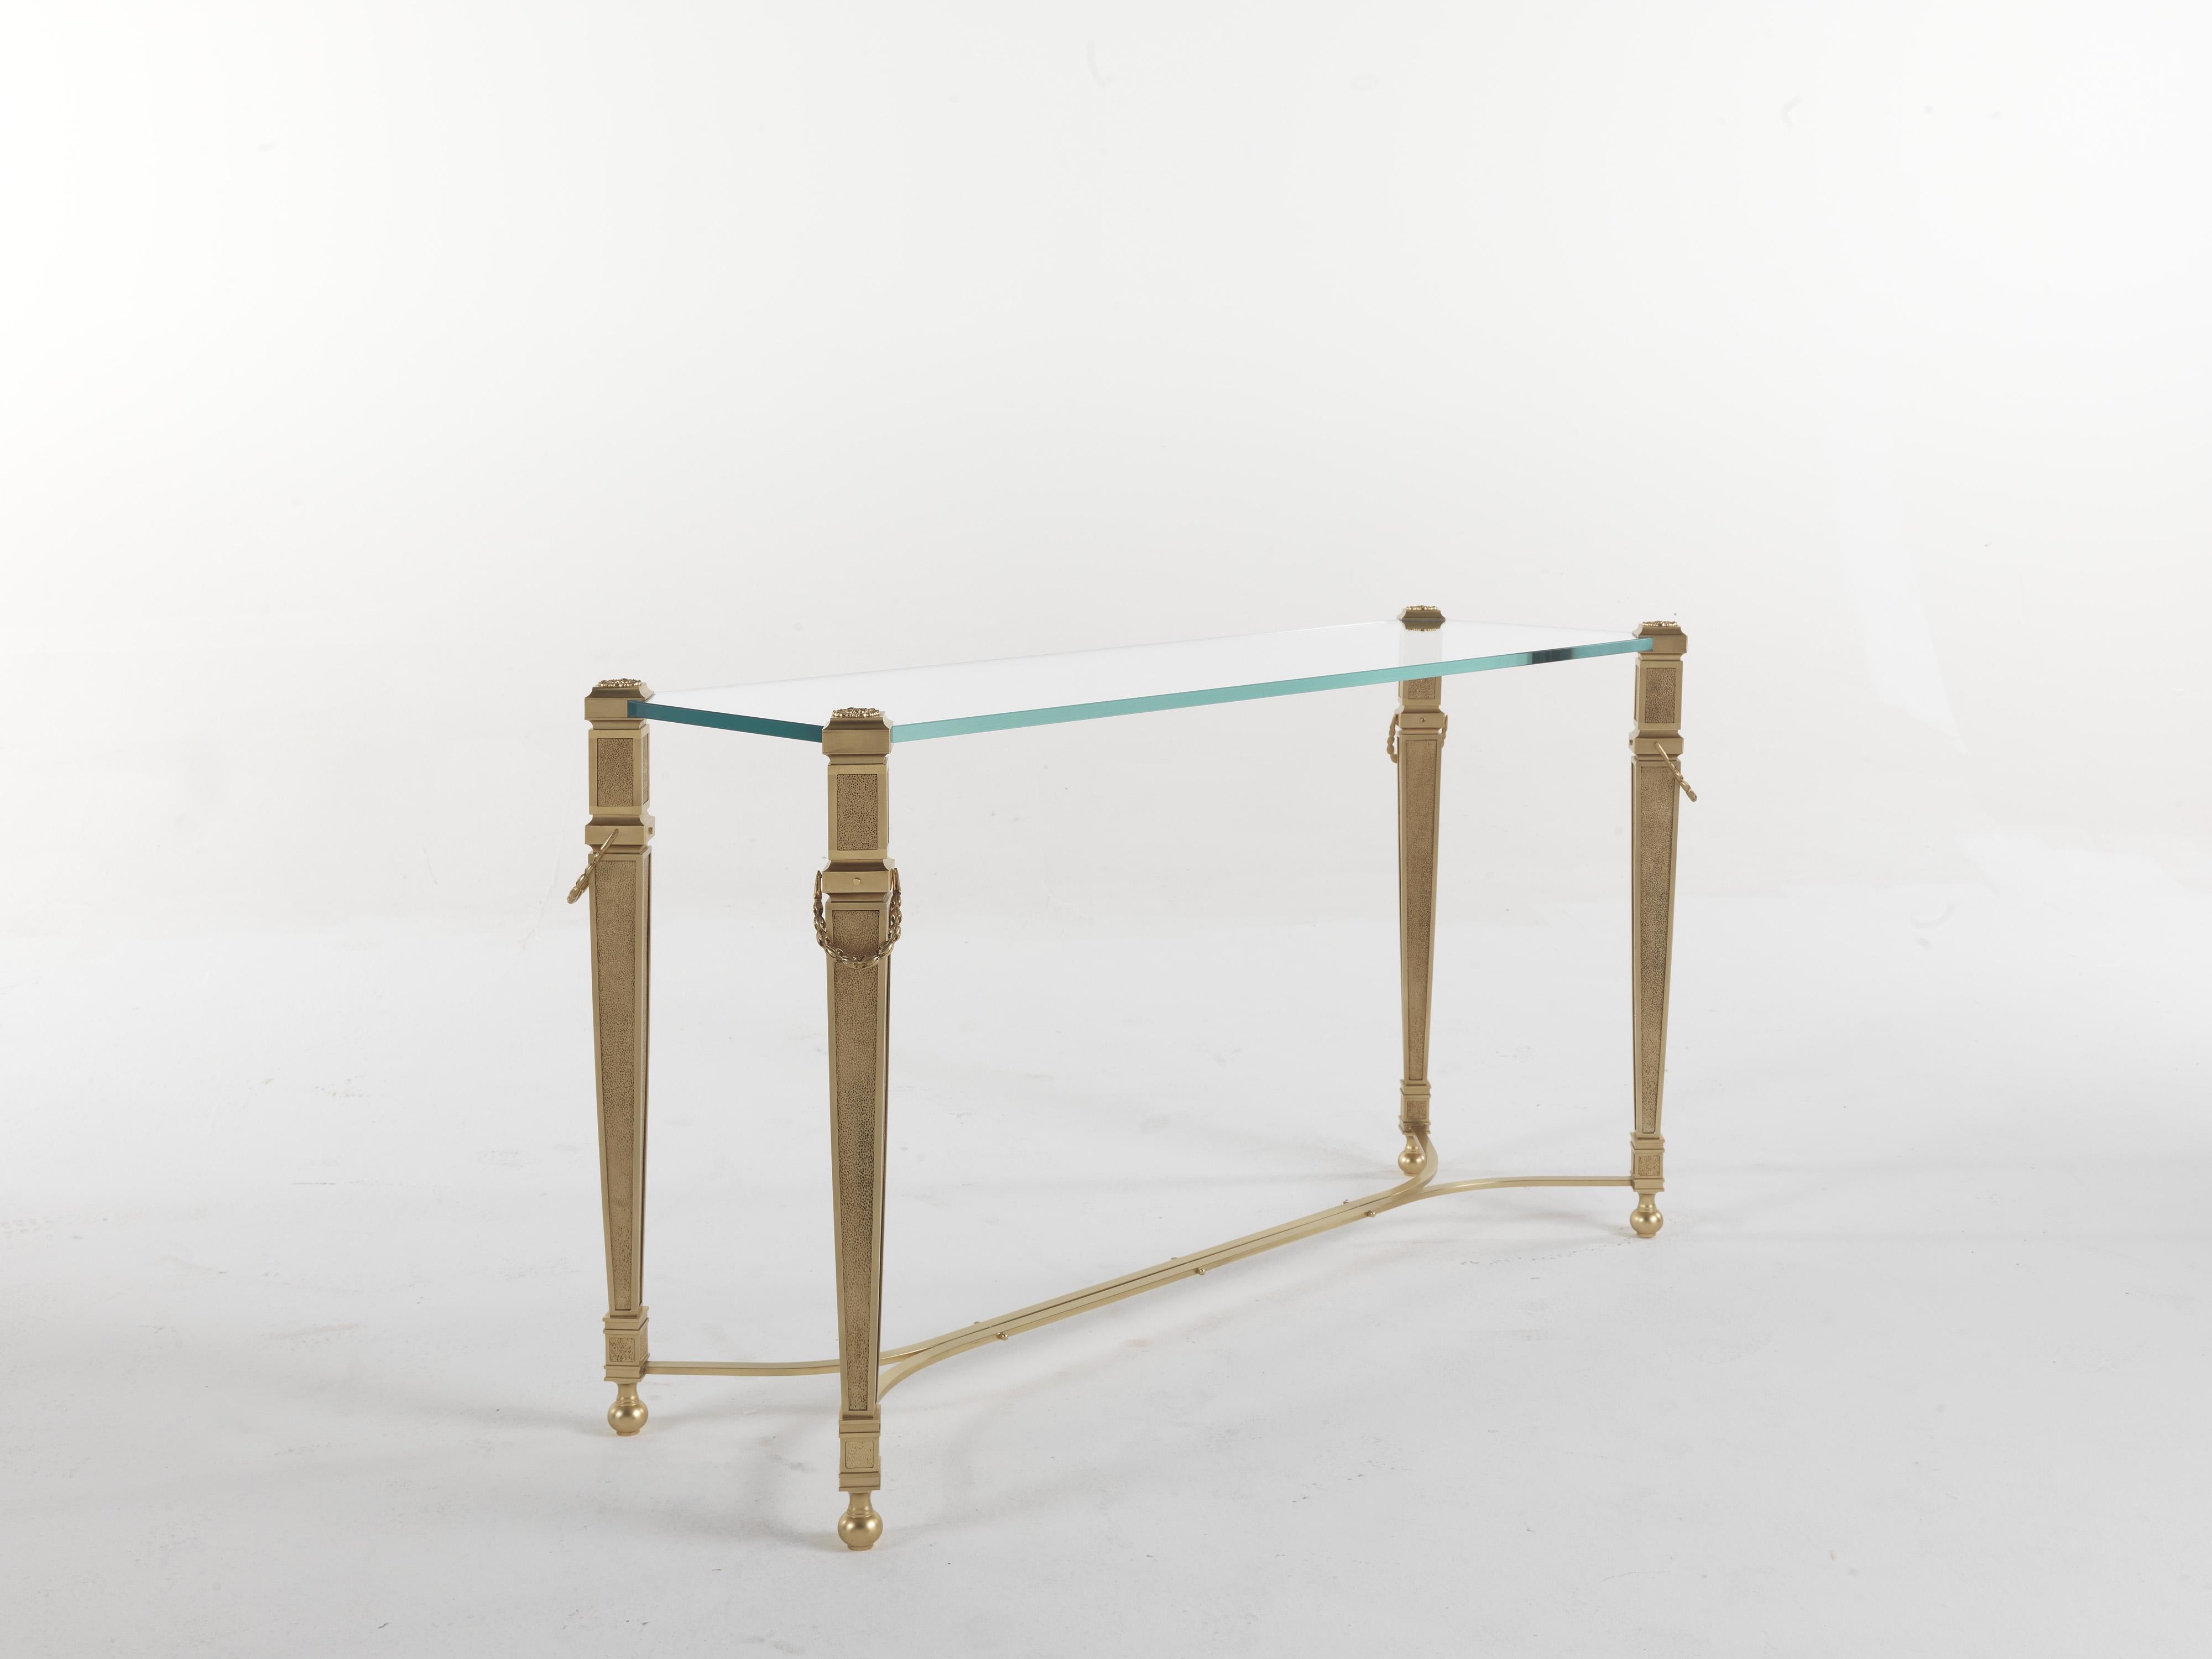 A light and refined design for Giove console. The structure, with a golden finish, features decorative elements in a neo-classical style, while the top is in extra light glass. A piece of furniture with a versatile and timeless style, able to fit